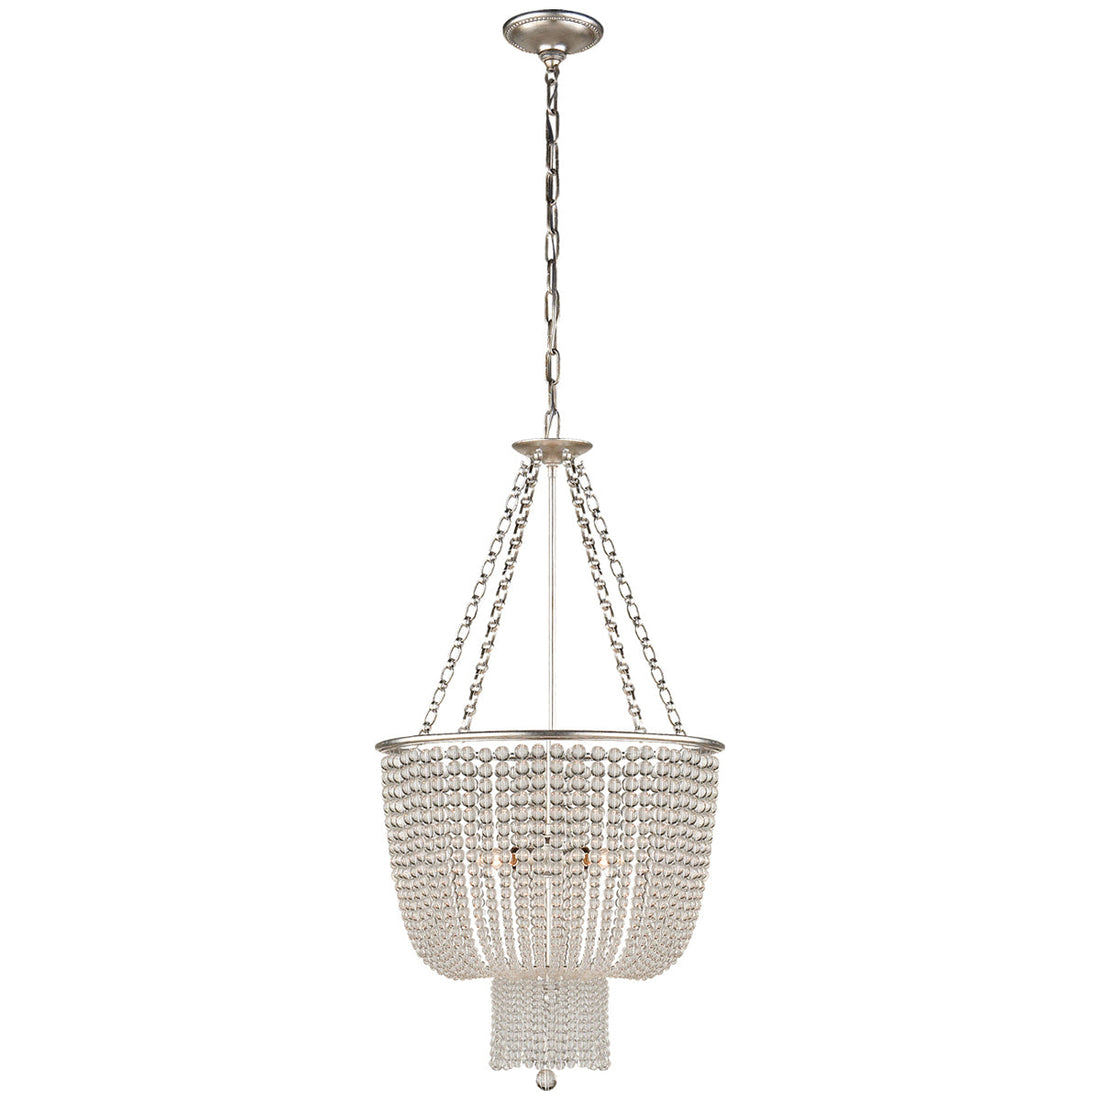 Visual Comfort Jacqueline Chandelier with Clear Glass